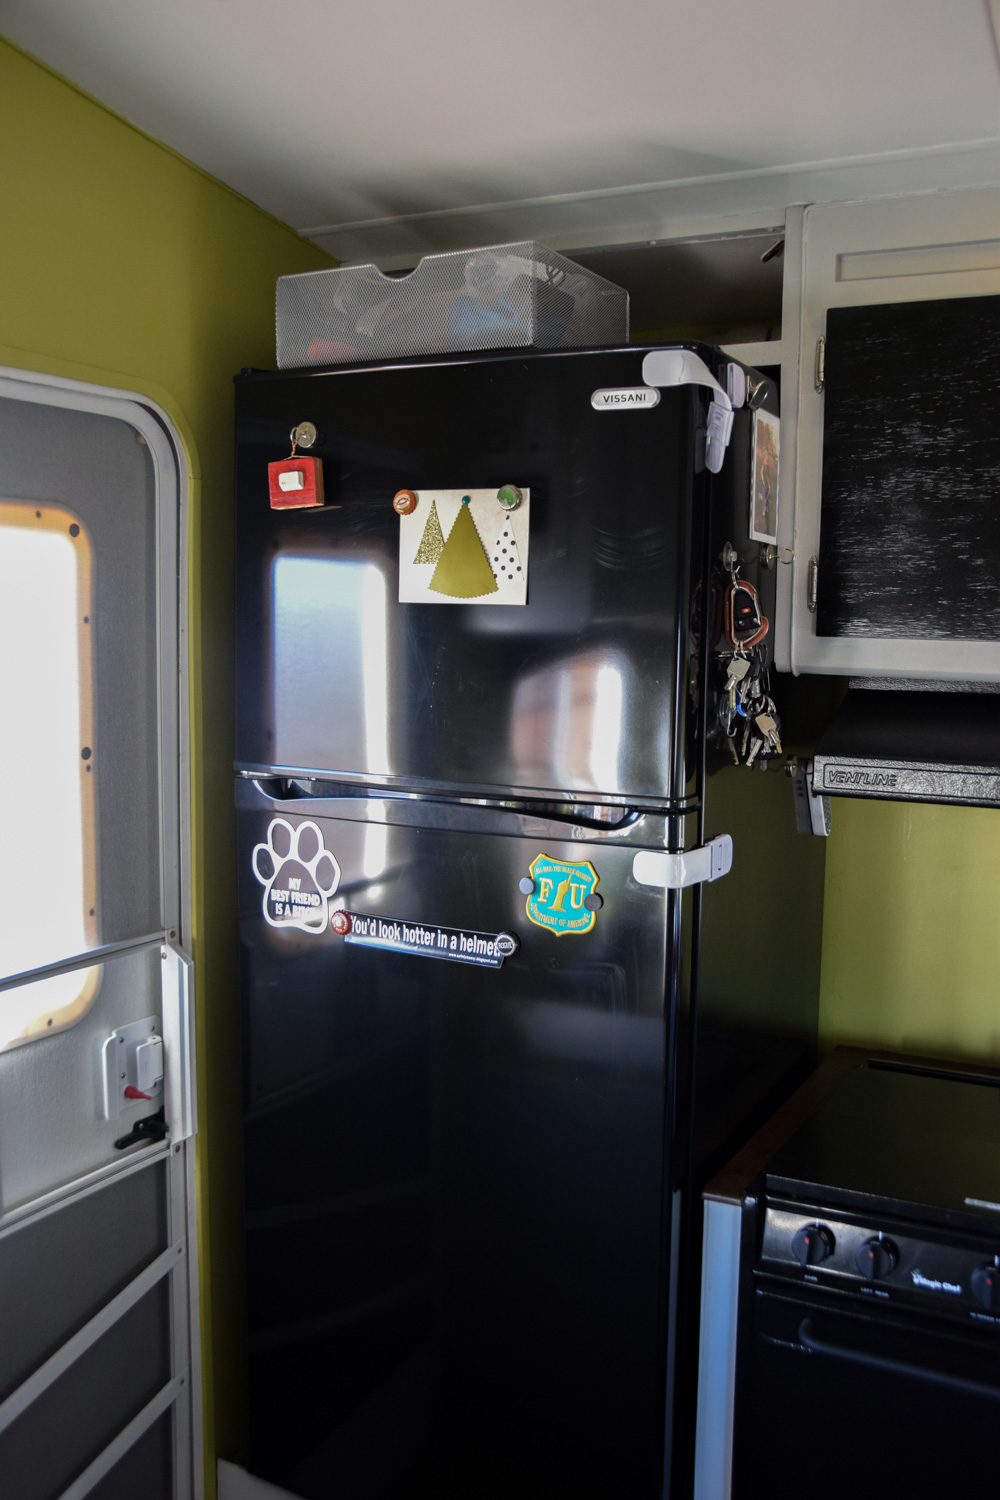 Replacing an RV Refrigerator With Residential